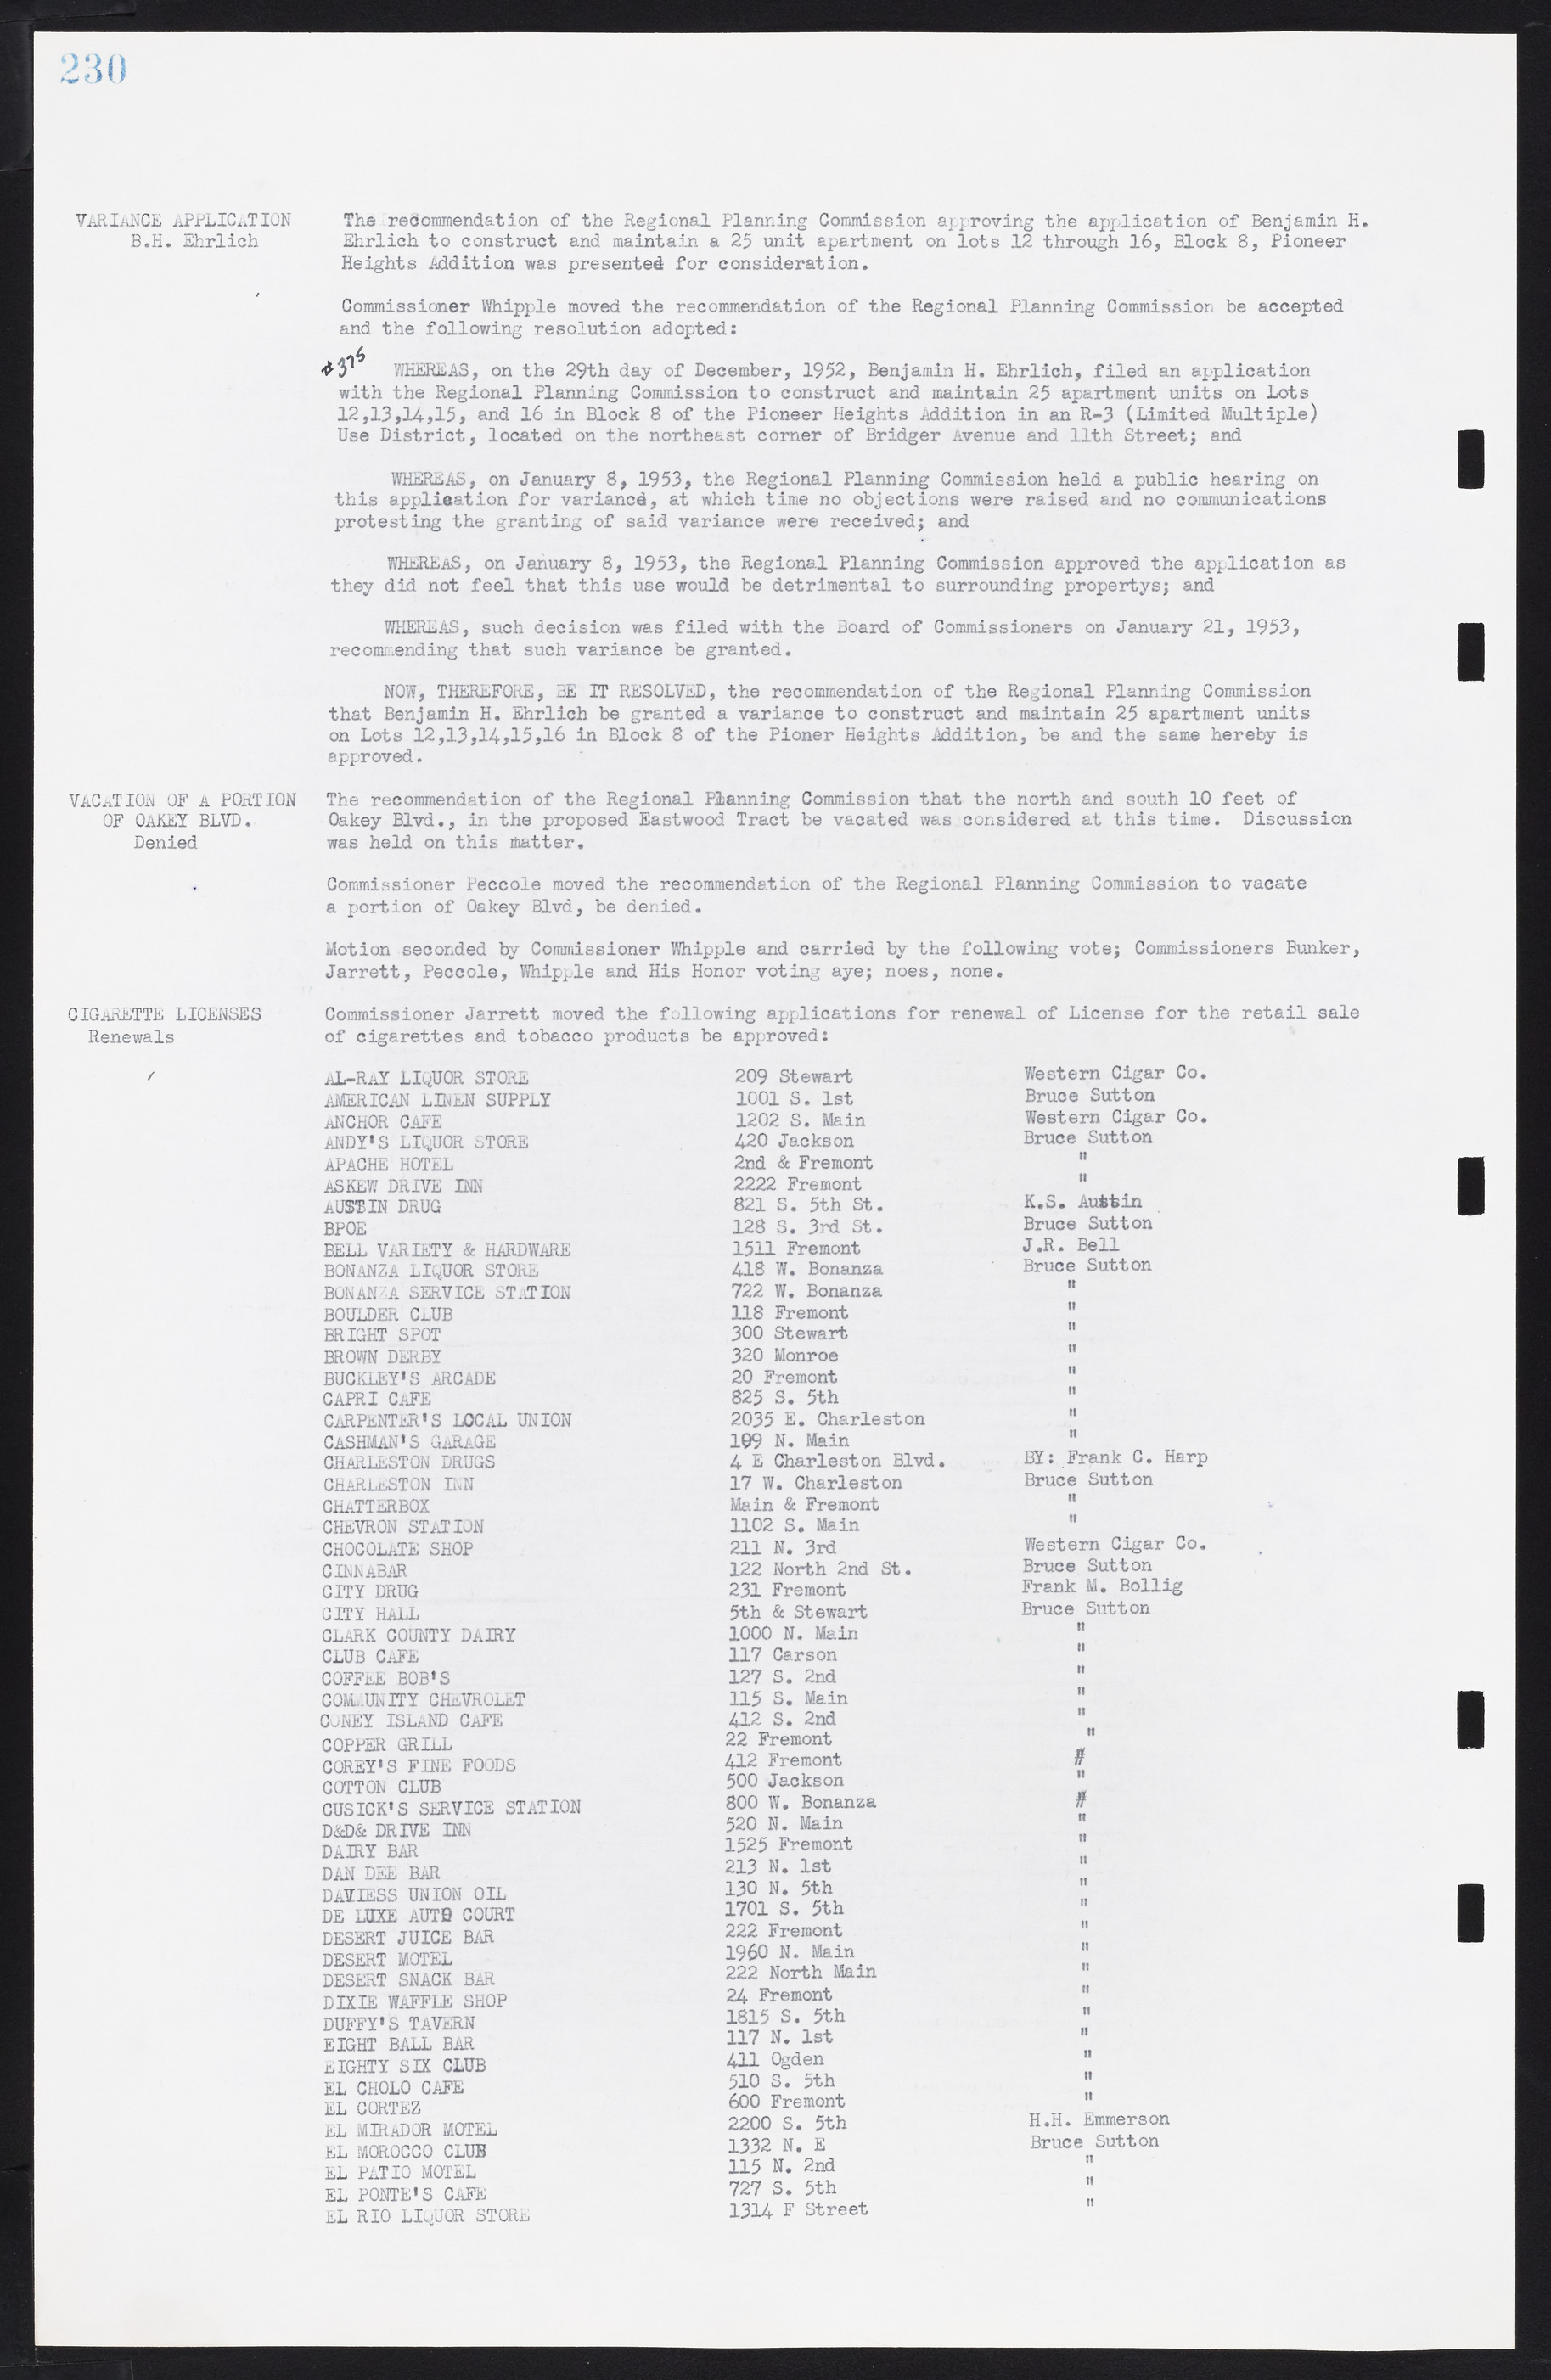 Las Vegas City Commission Minutes, May 26, 1952 to February 17, 1954, lvc000008-246